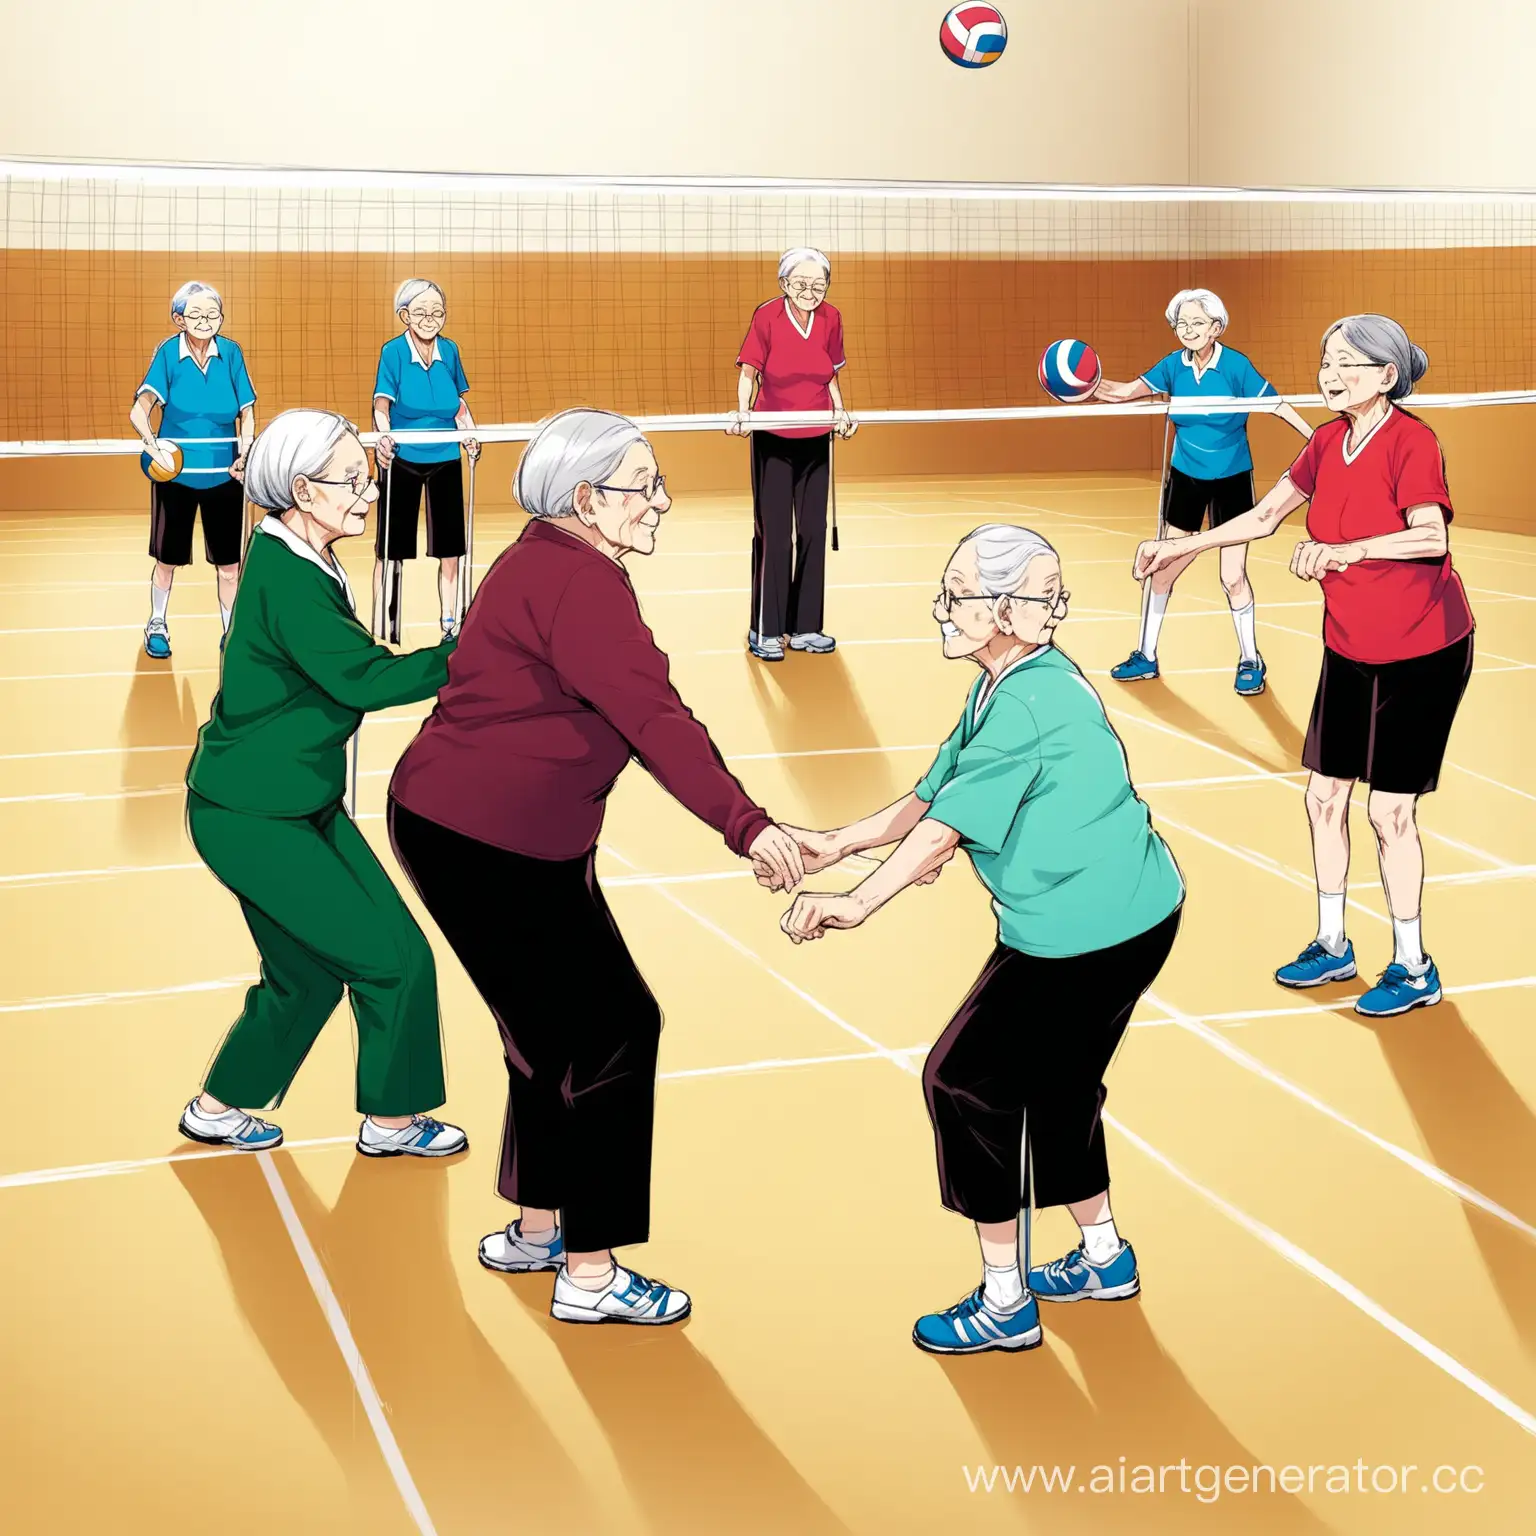 Elderly-Group-Engaged-in-Active-Hall-Volleyball-Game